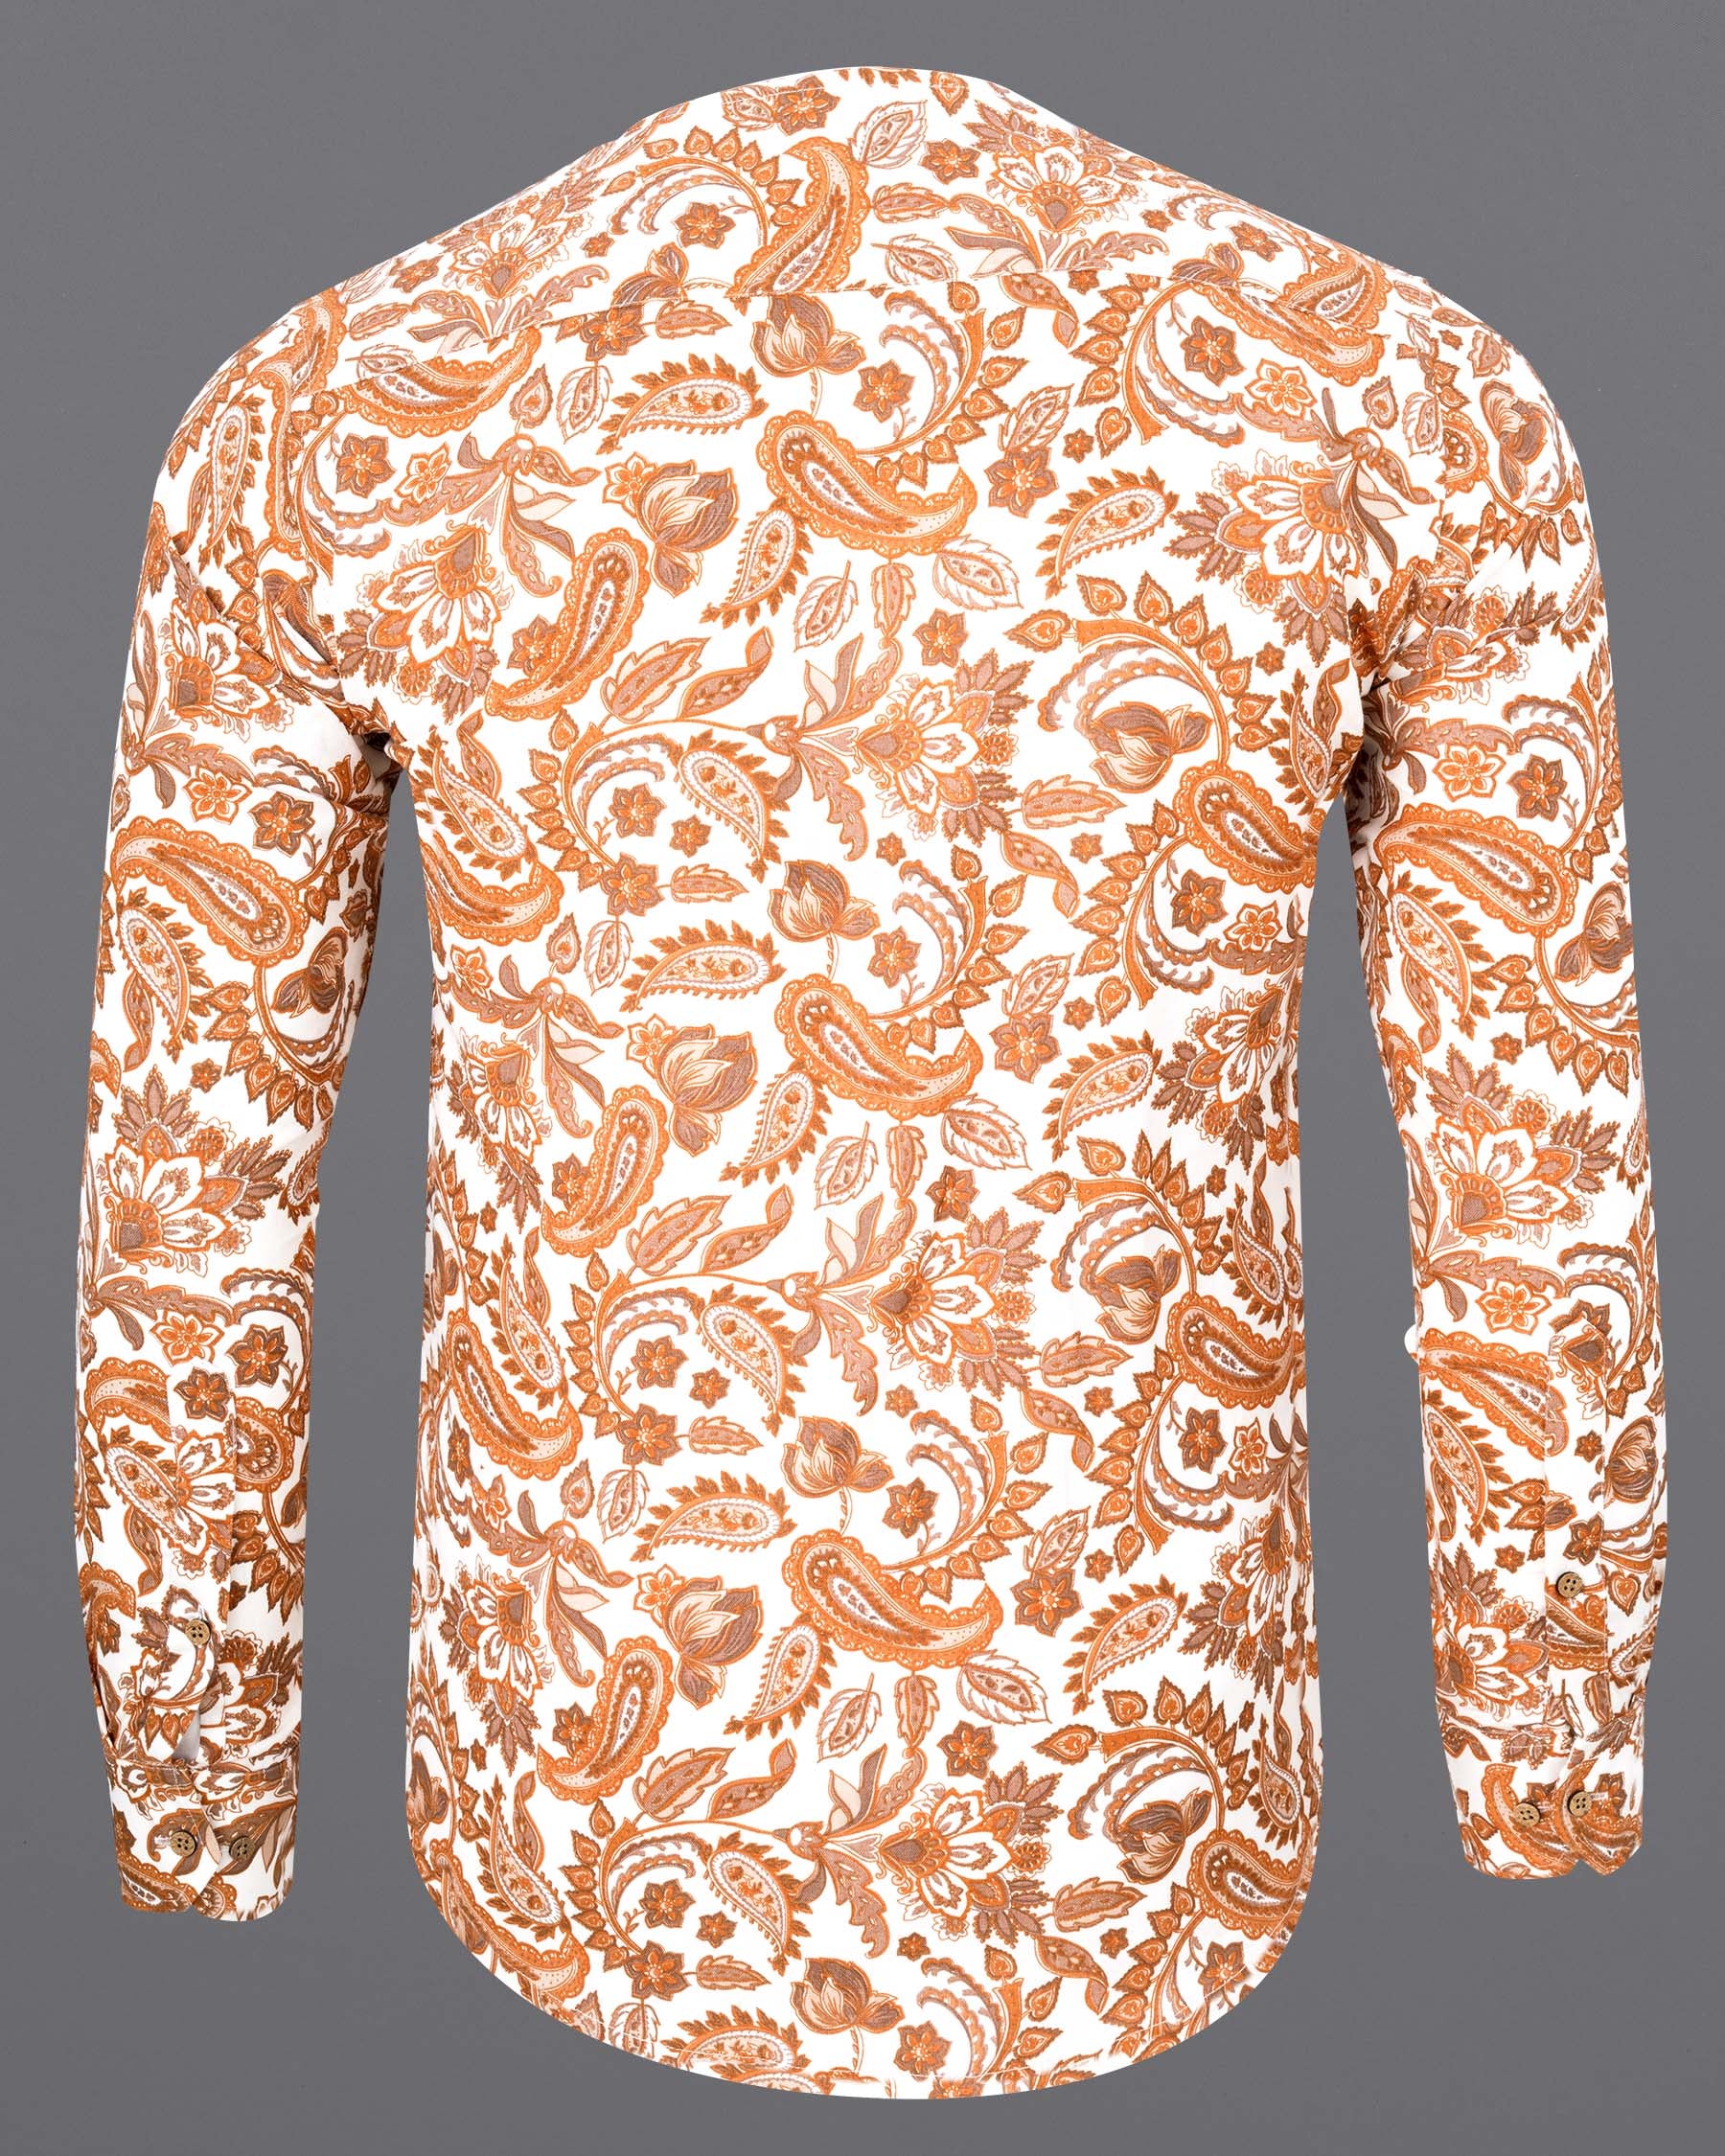 White Lilac and Pale Brown Paisley and Floral Printed Luxurious Linen Kurta Shirt